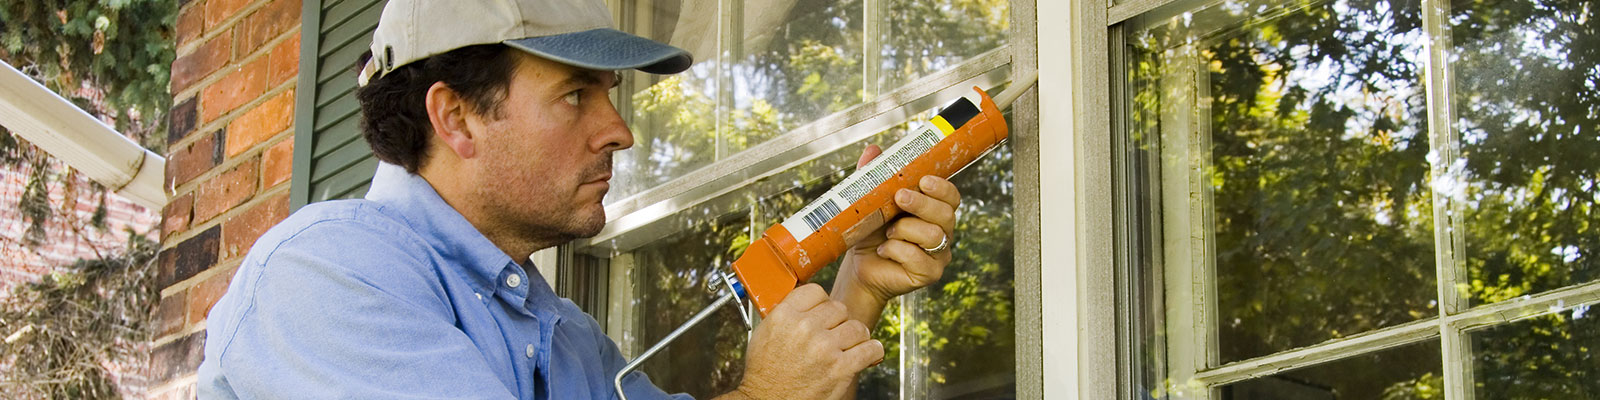 Man repairing a window on the outside of a home